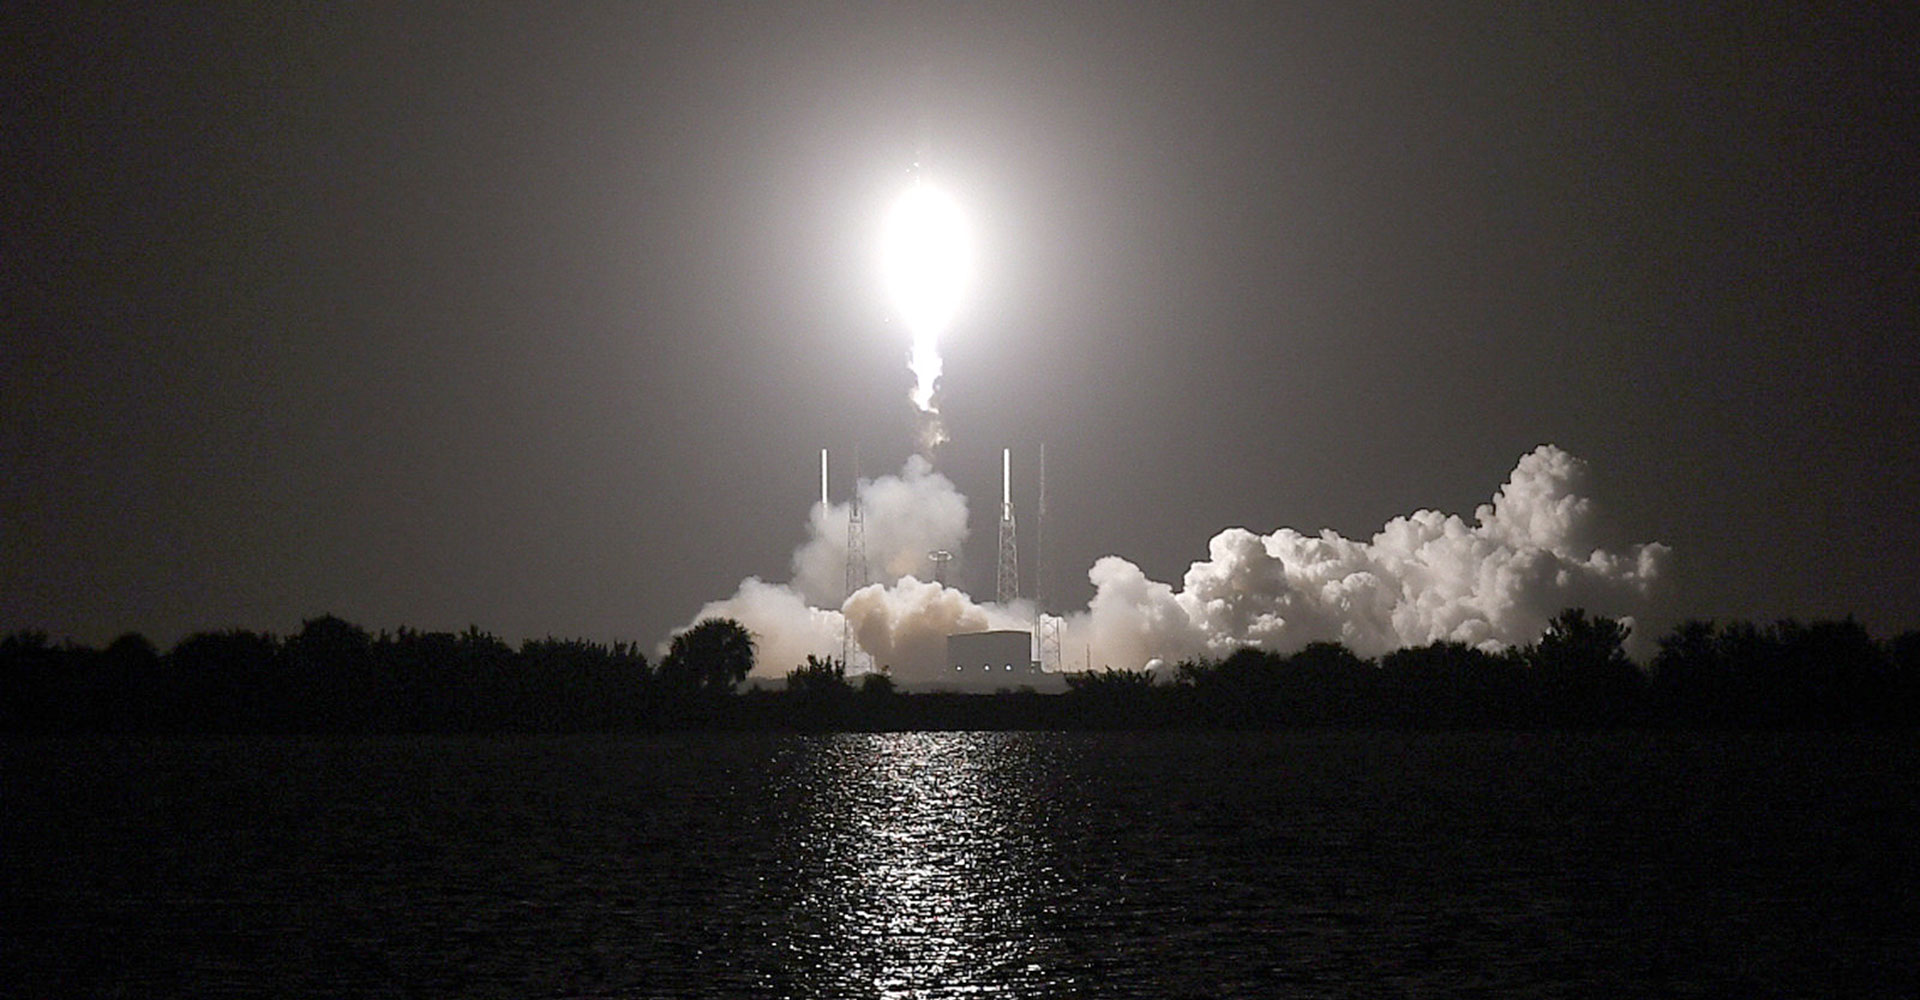 TURKSAT 5B Communications Satellite Launched with Falcon 9 Rocket!